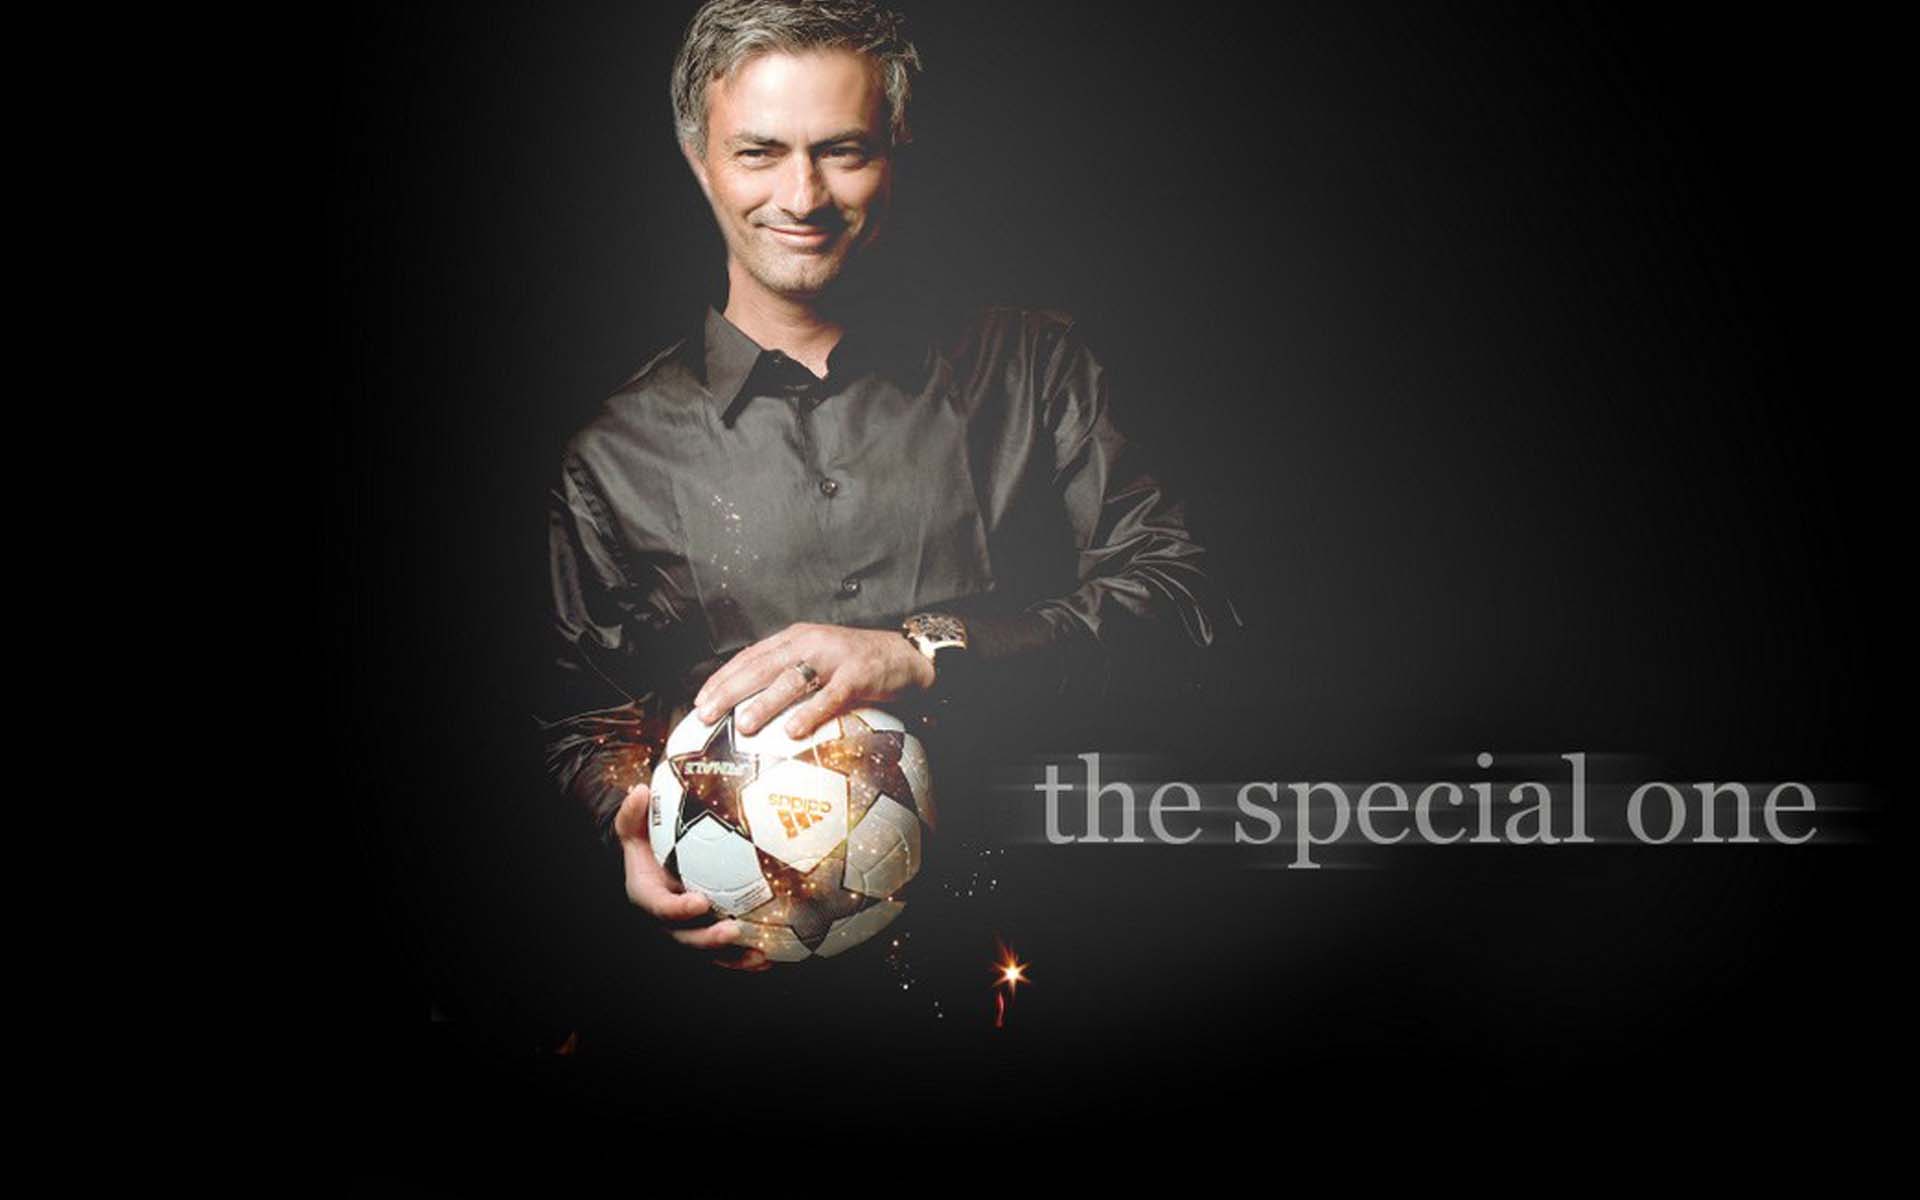 The Special One Jose Mourinho 2014 Wallpaper Wide or HD. Male